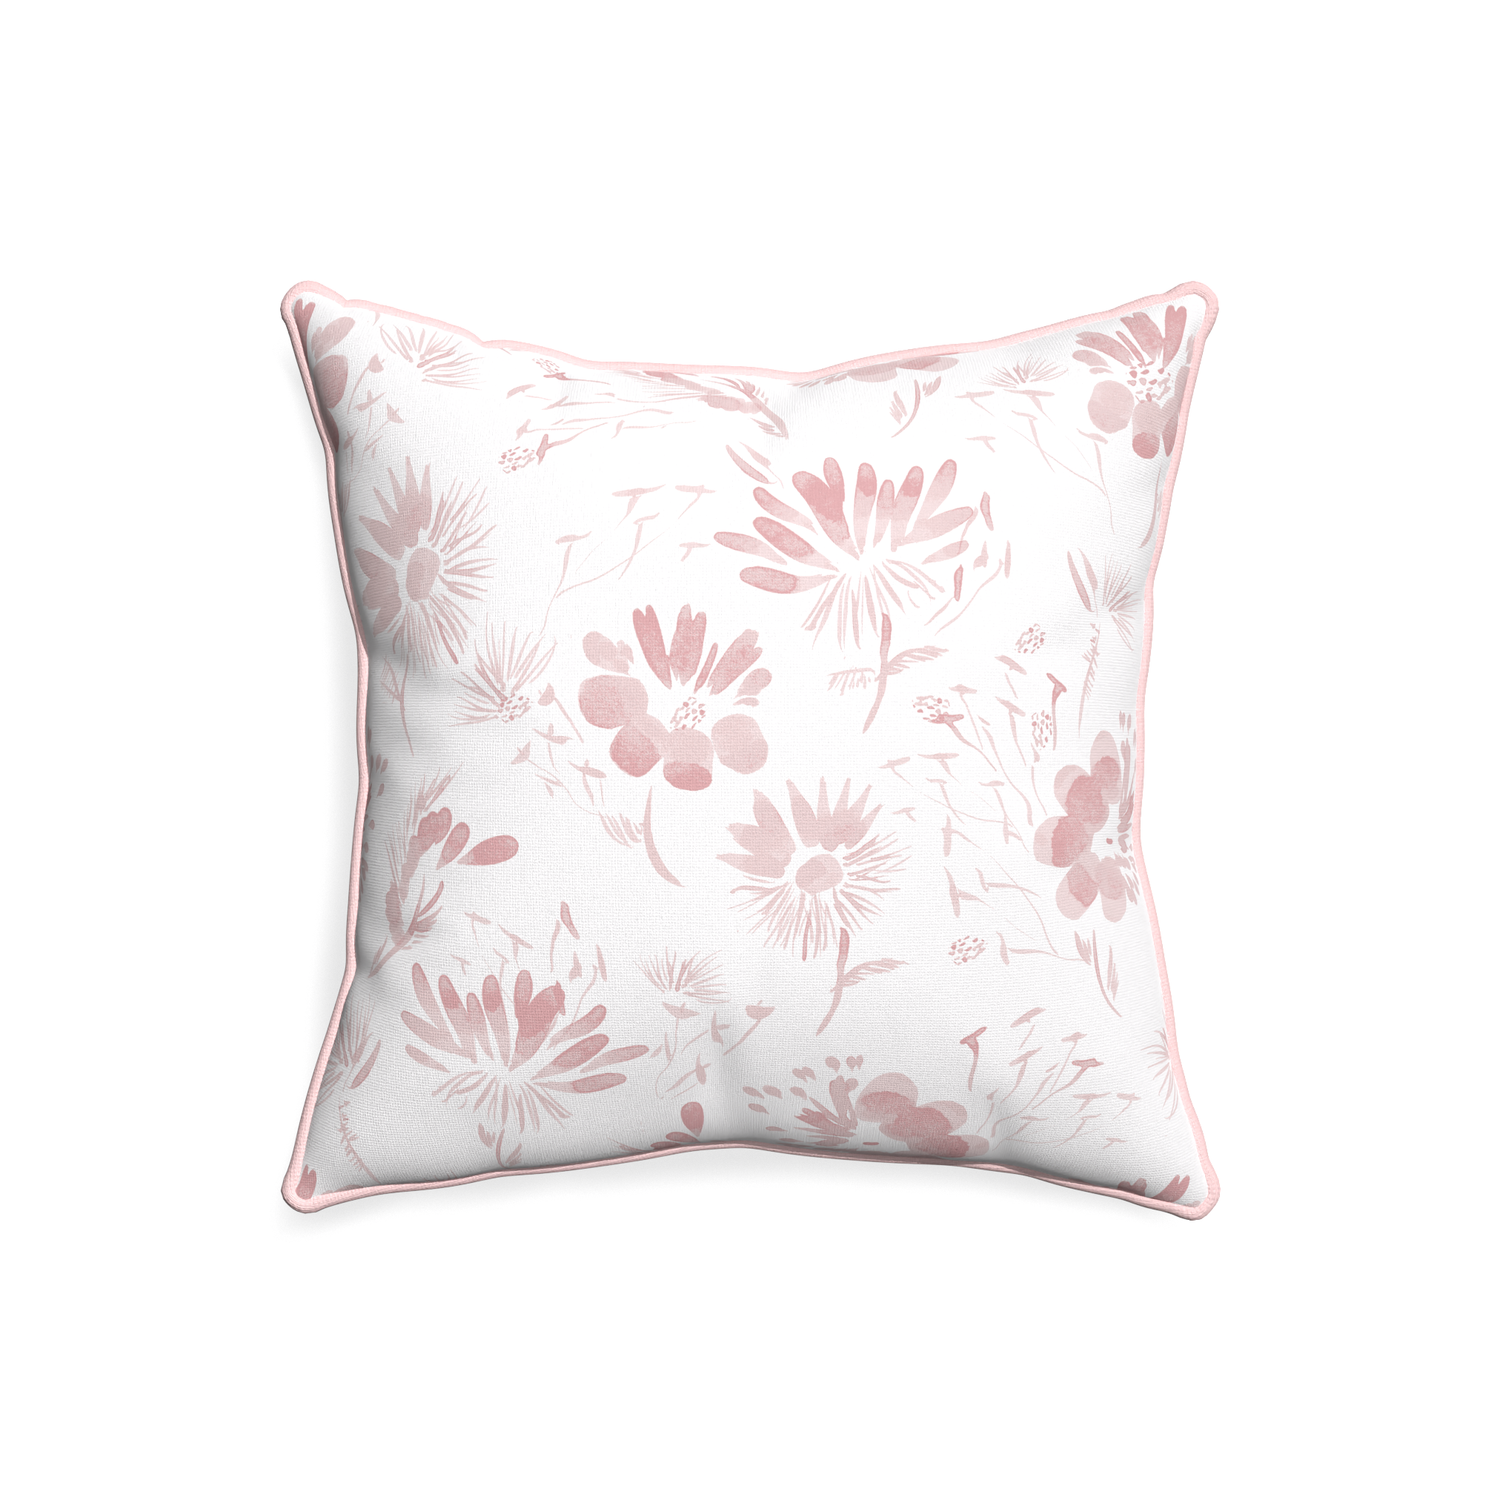 20-square blake custom pink floralpillow with petal piping on white background